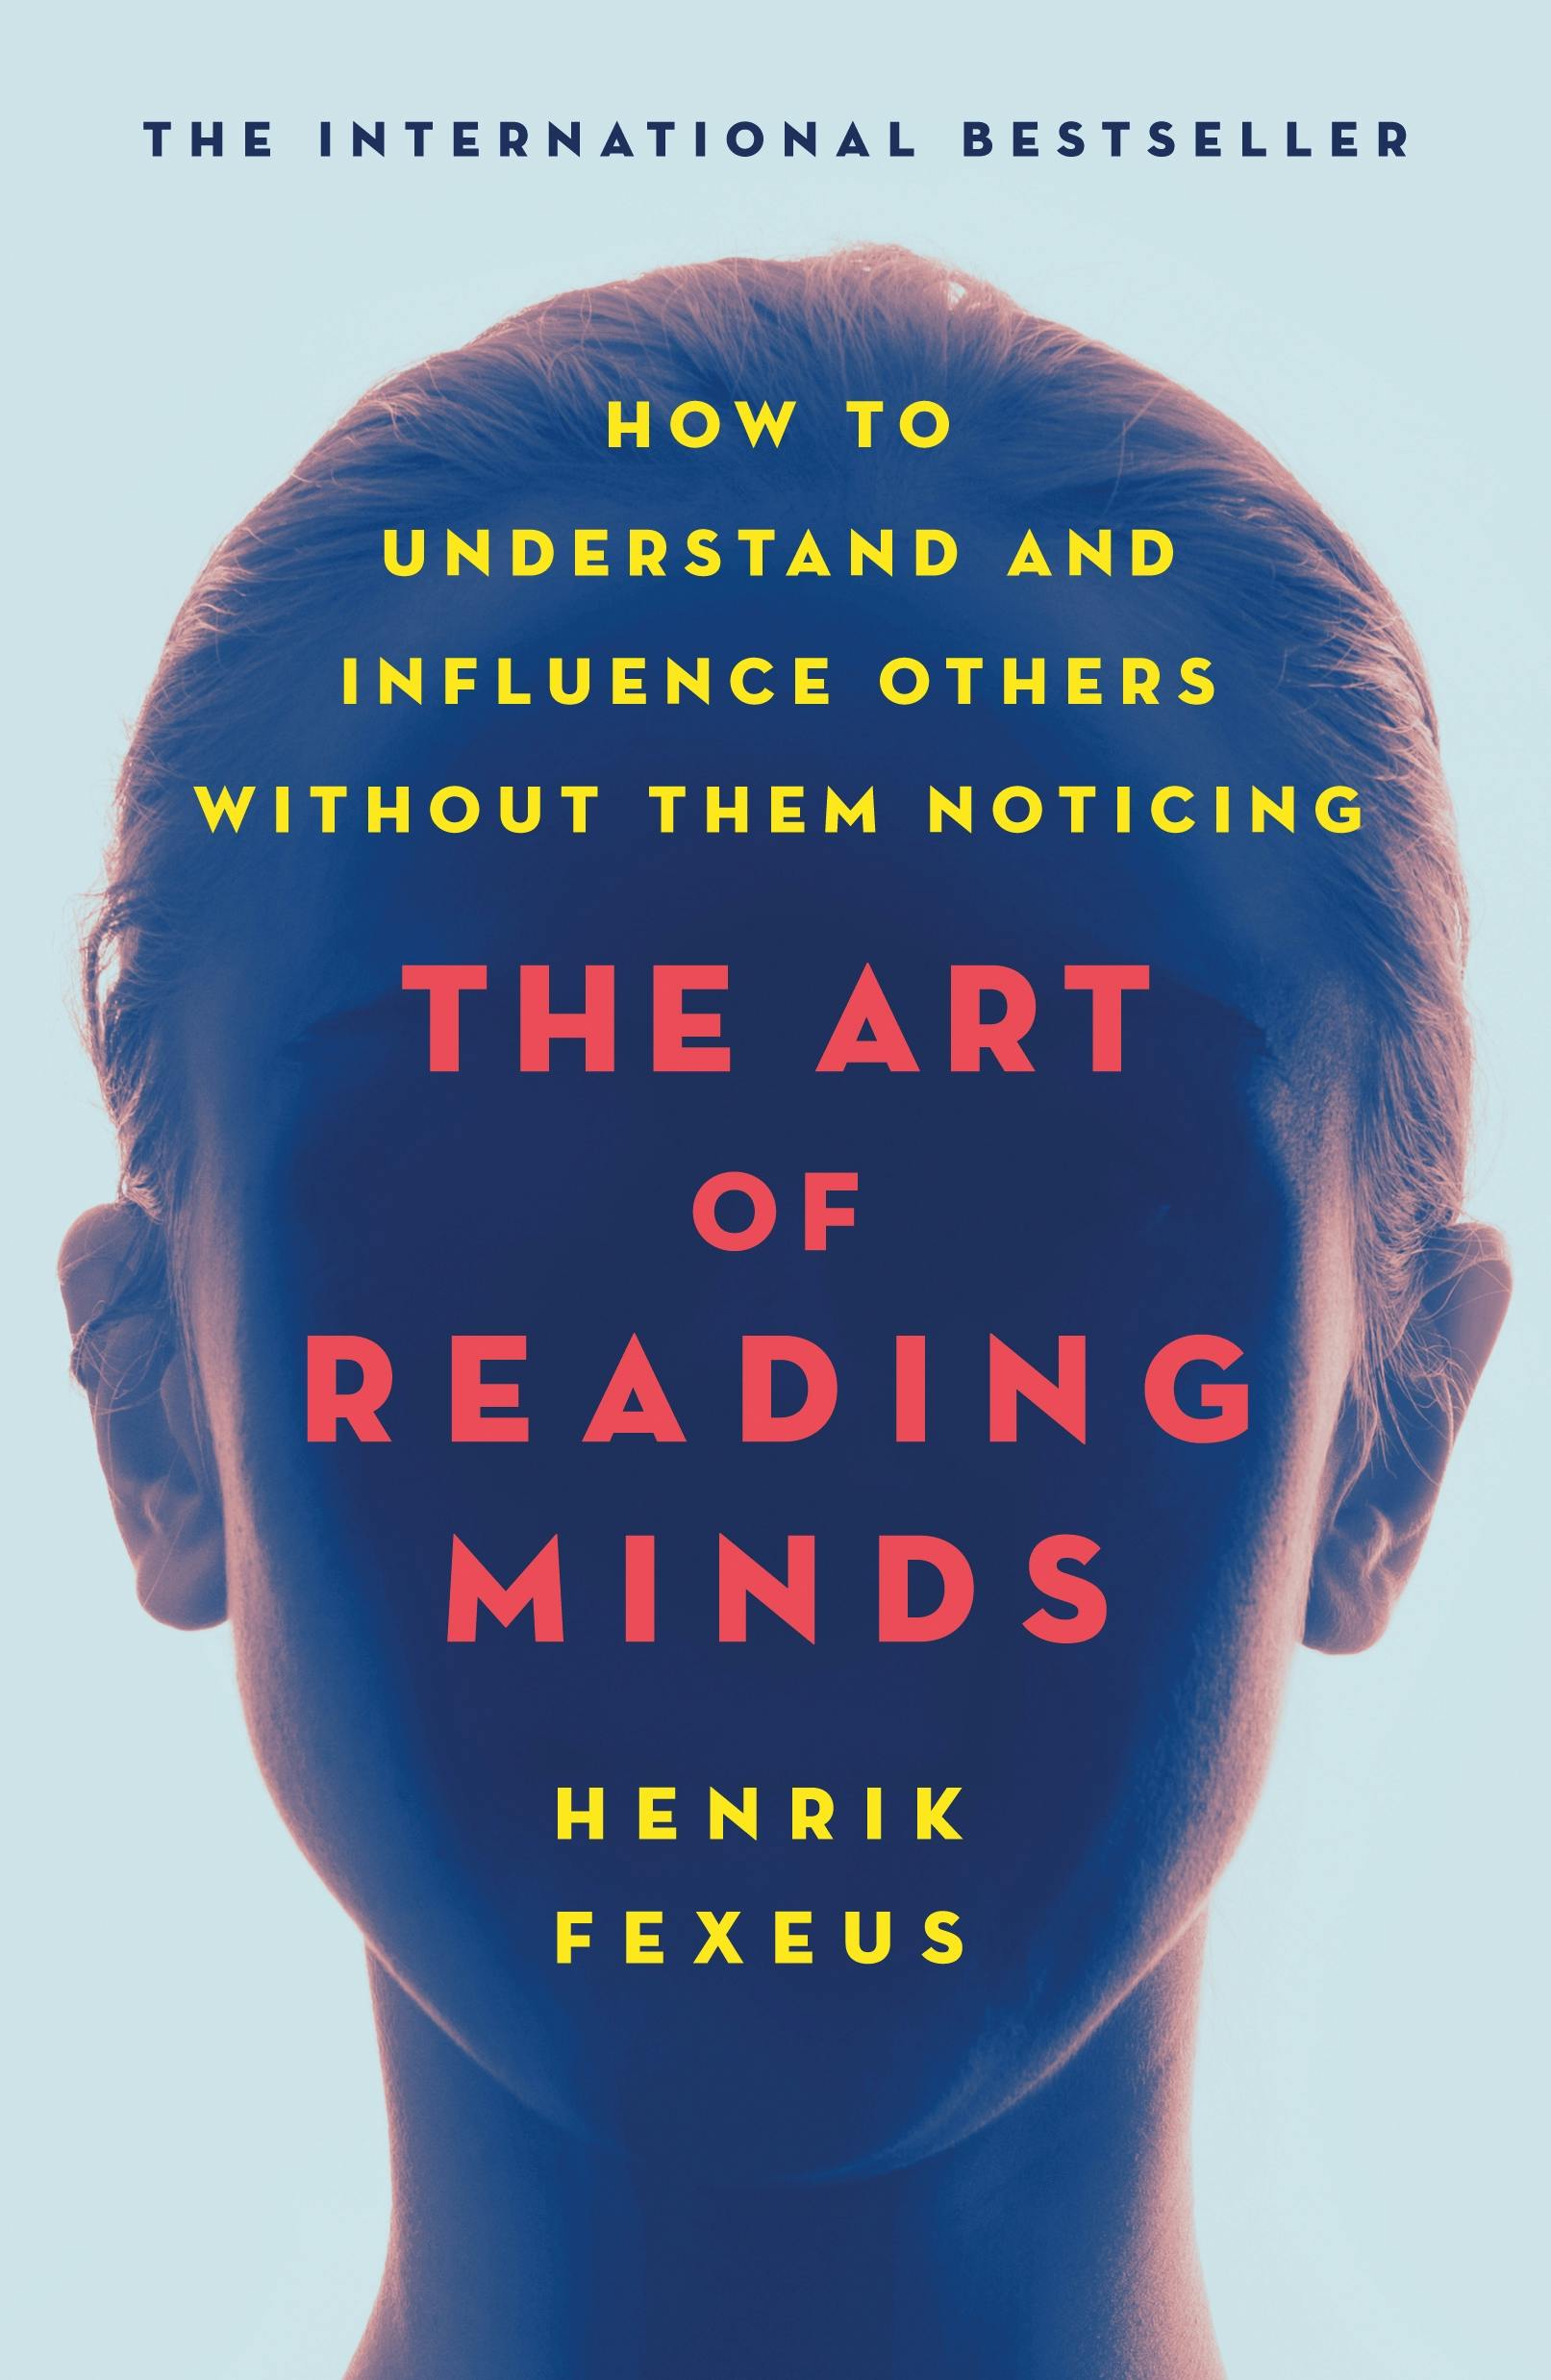 Describes for The Art of Reading Minds by authors